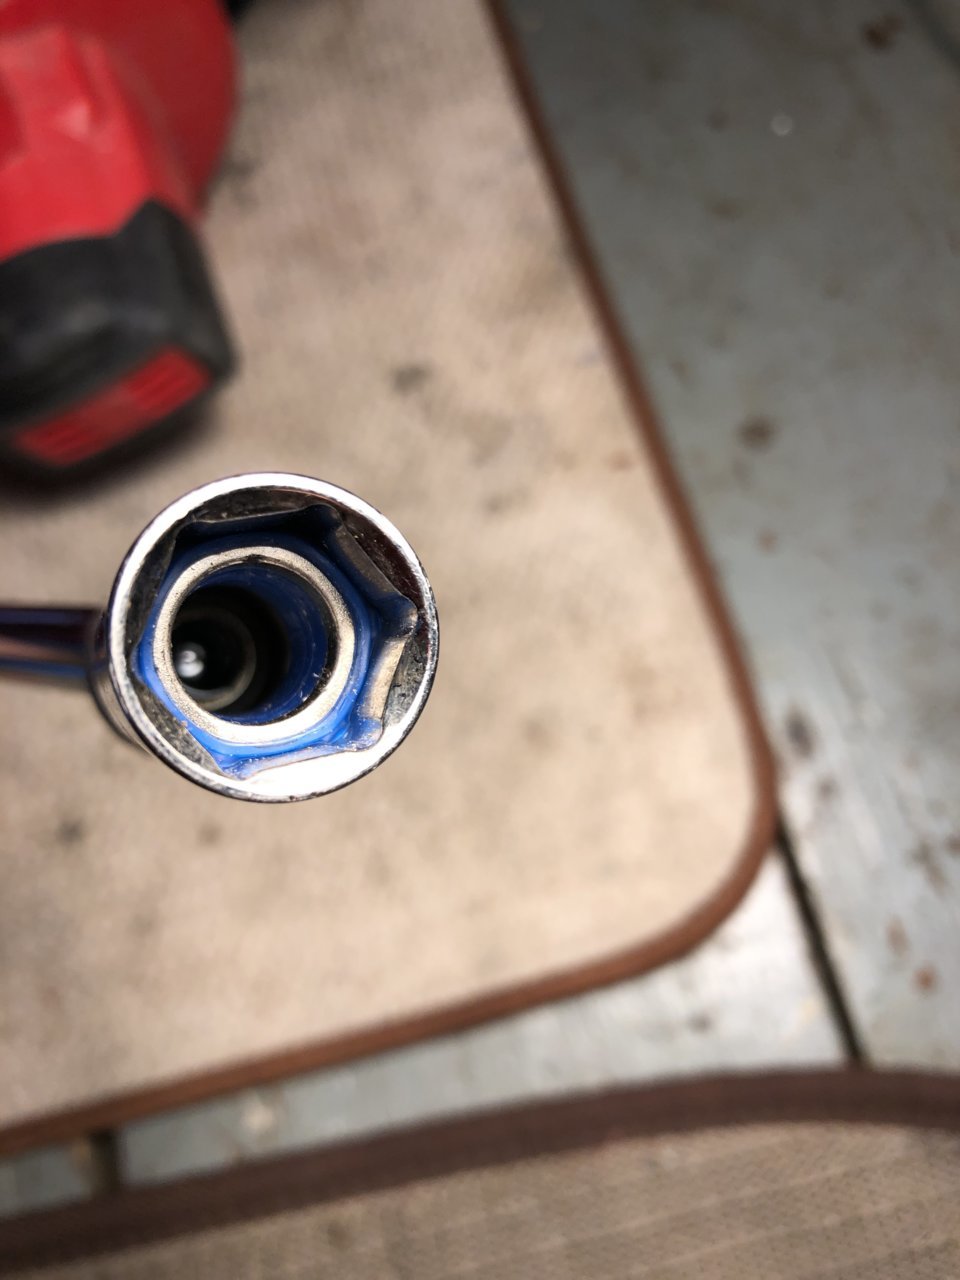 Installing new spark plugs, over tightened my first one | Toyota Tundra